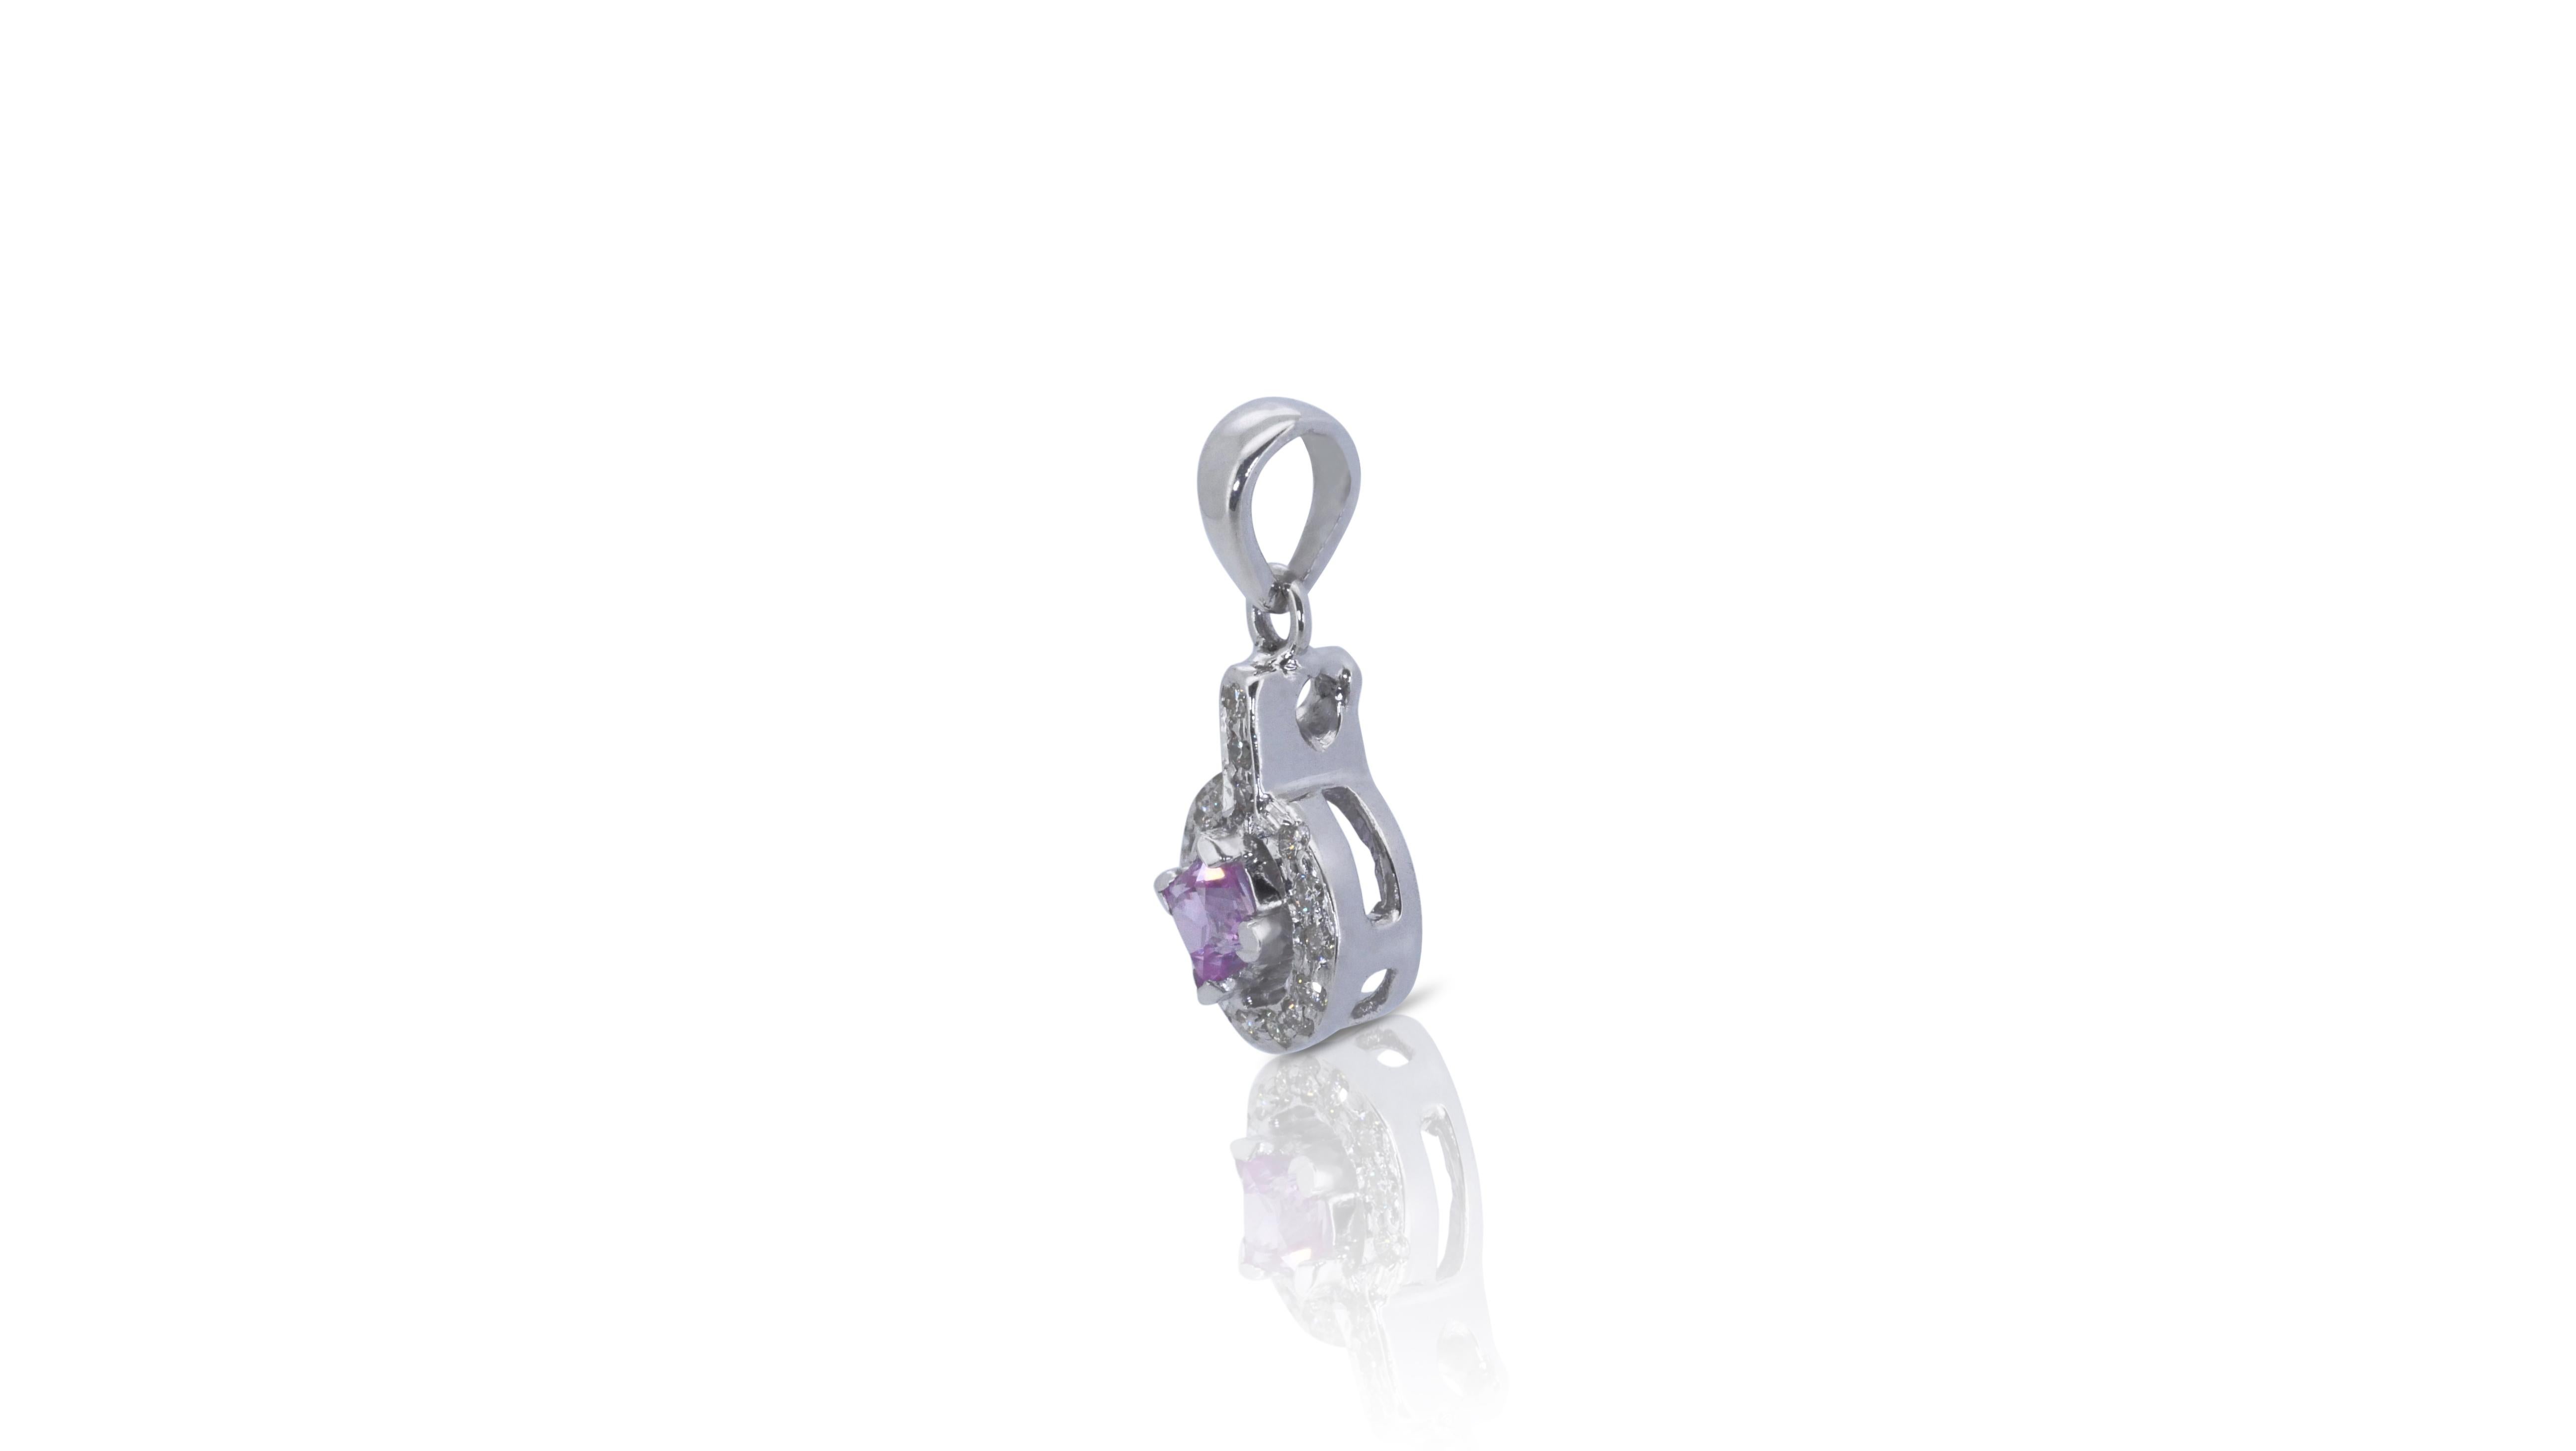 A gorgeous halo pendant with a dazzling 0.1 carat  natural sapphire. It has 0.16 carat of side diamonds which add more to its elegance. The jewelry is made of 18k white gold with a high quality polish. It comes with a fancy jewelry box.

1 sapphire